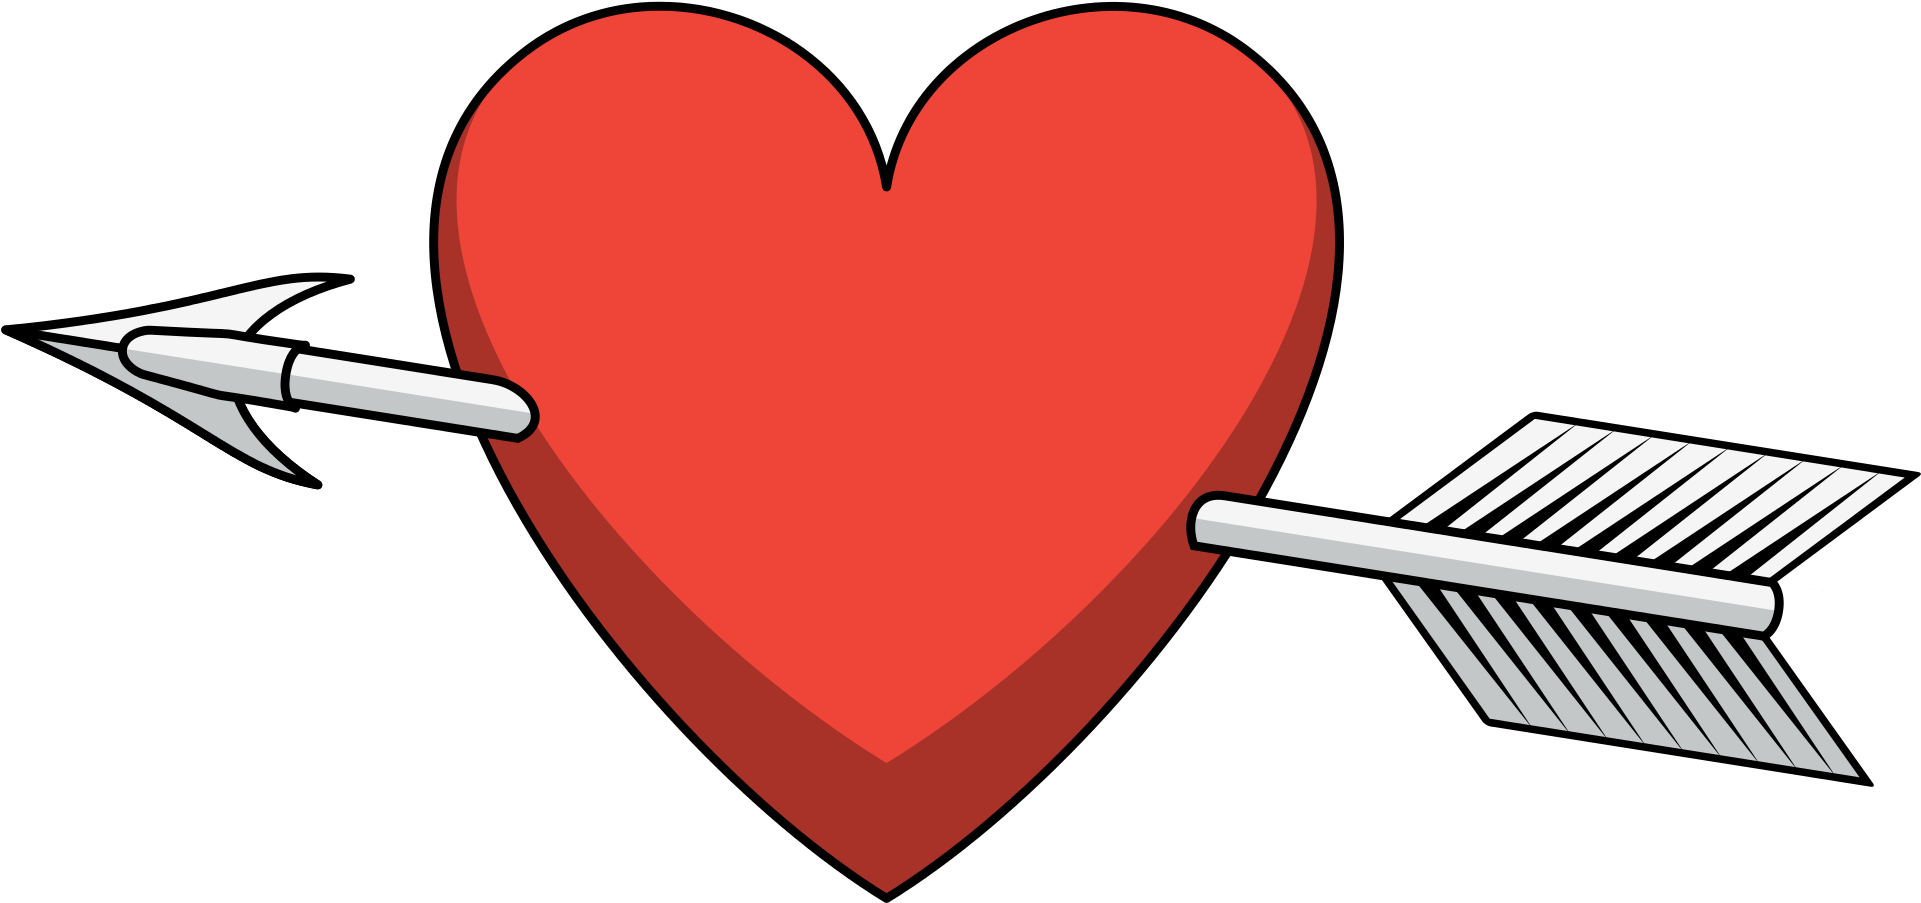 Download PNG image - Red Heart Arrow PNG Transparent Image 